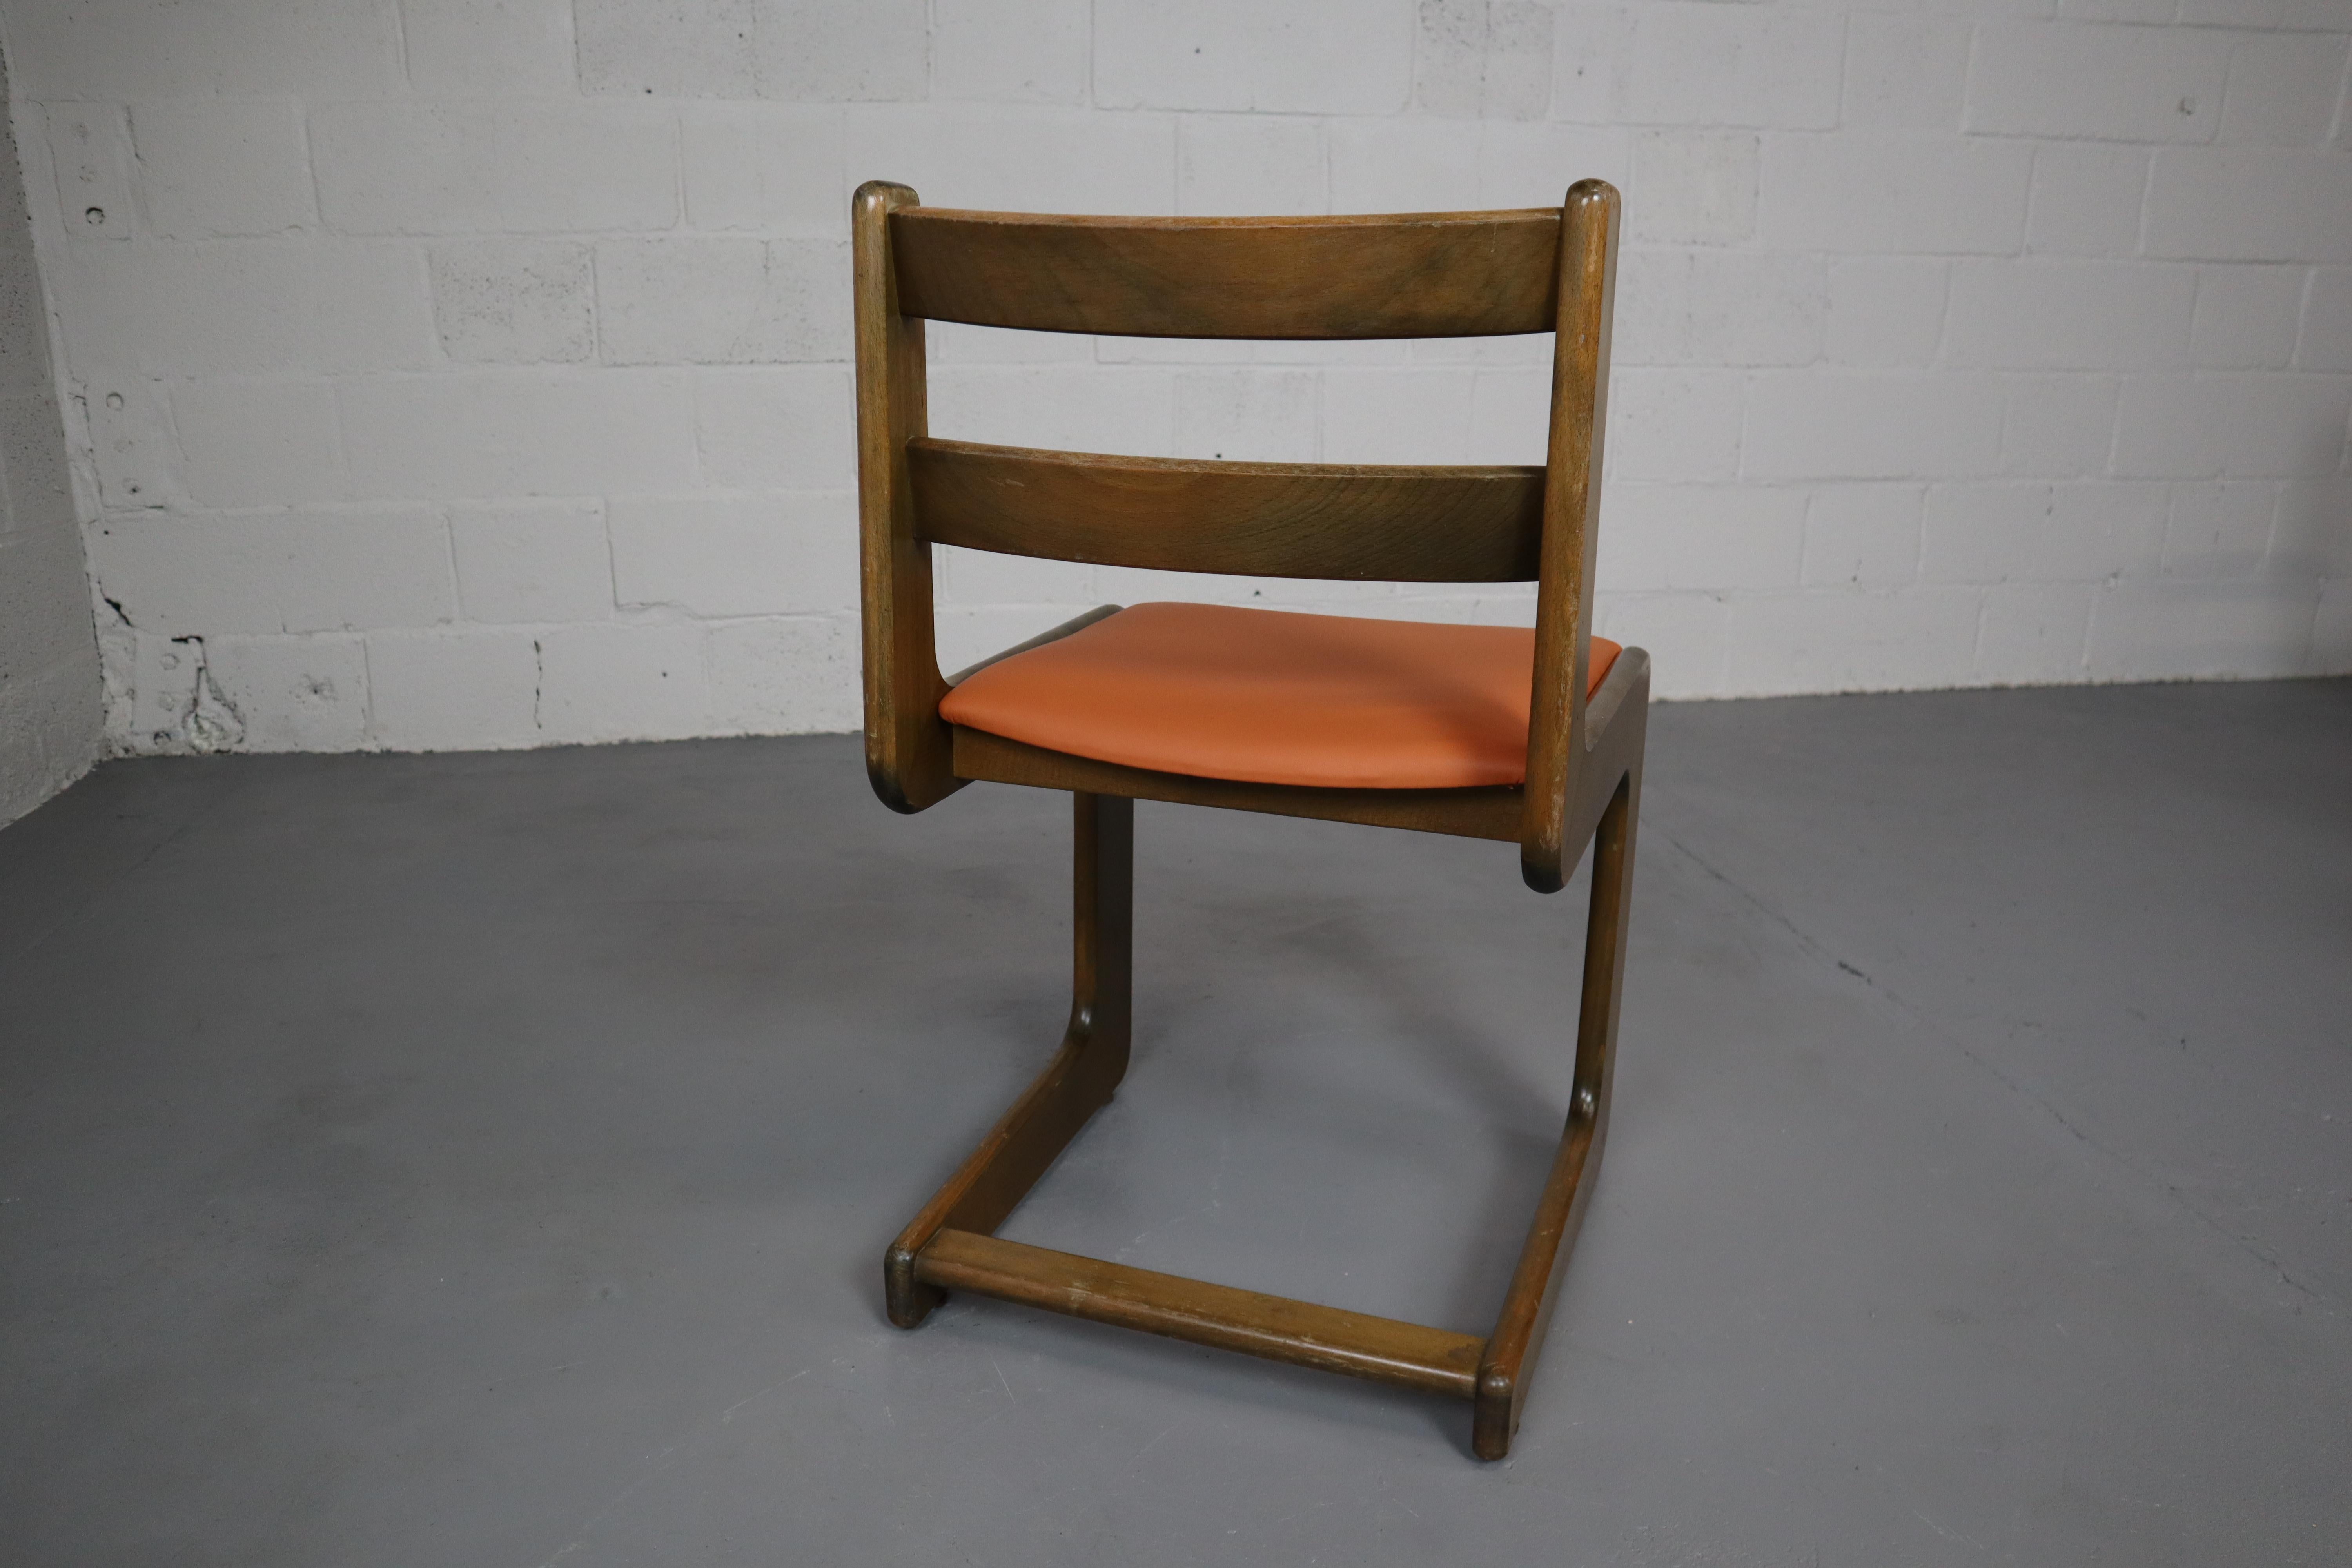 Six Cantilever Chairs by Casala in Leather and Beechwood, 1970s For Sale 5